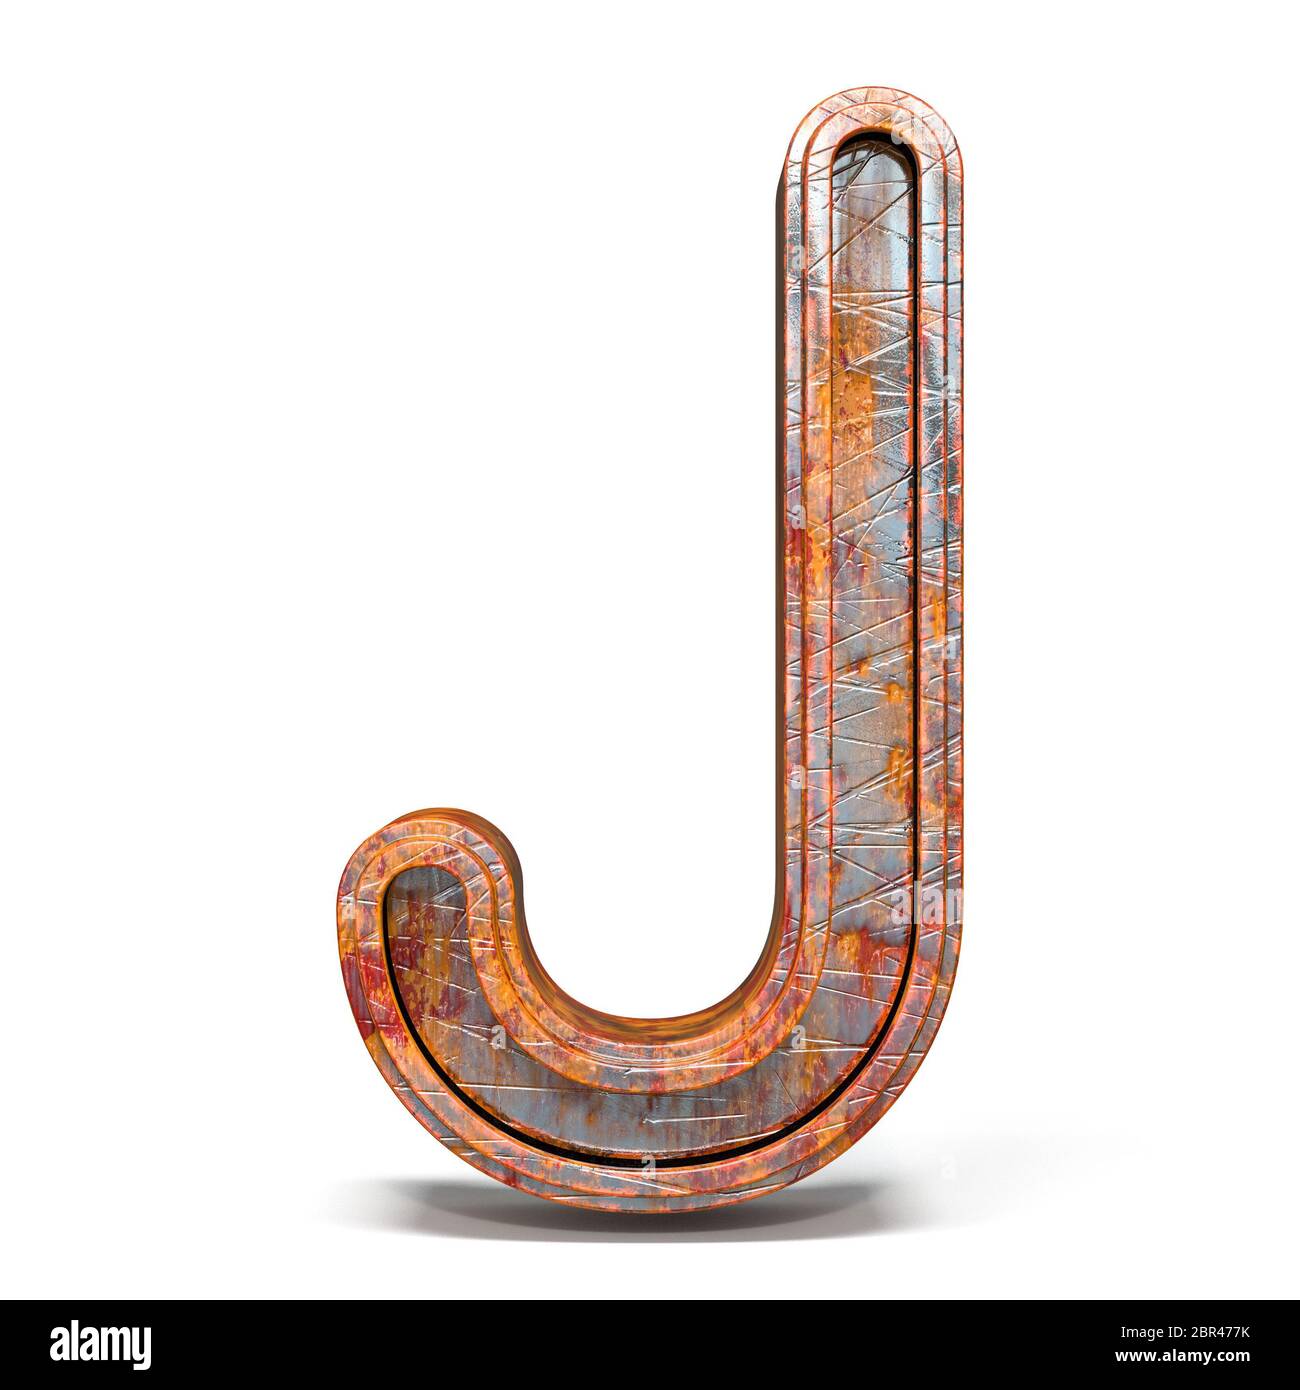 Rusty metal font Letter J 3D render illustration isolated on white background Stock Photo